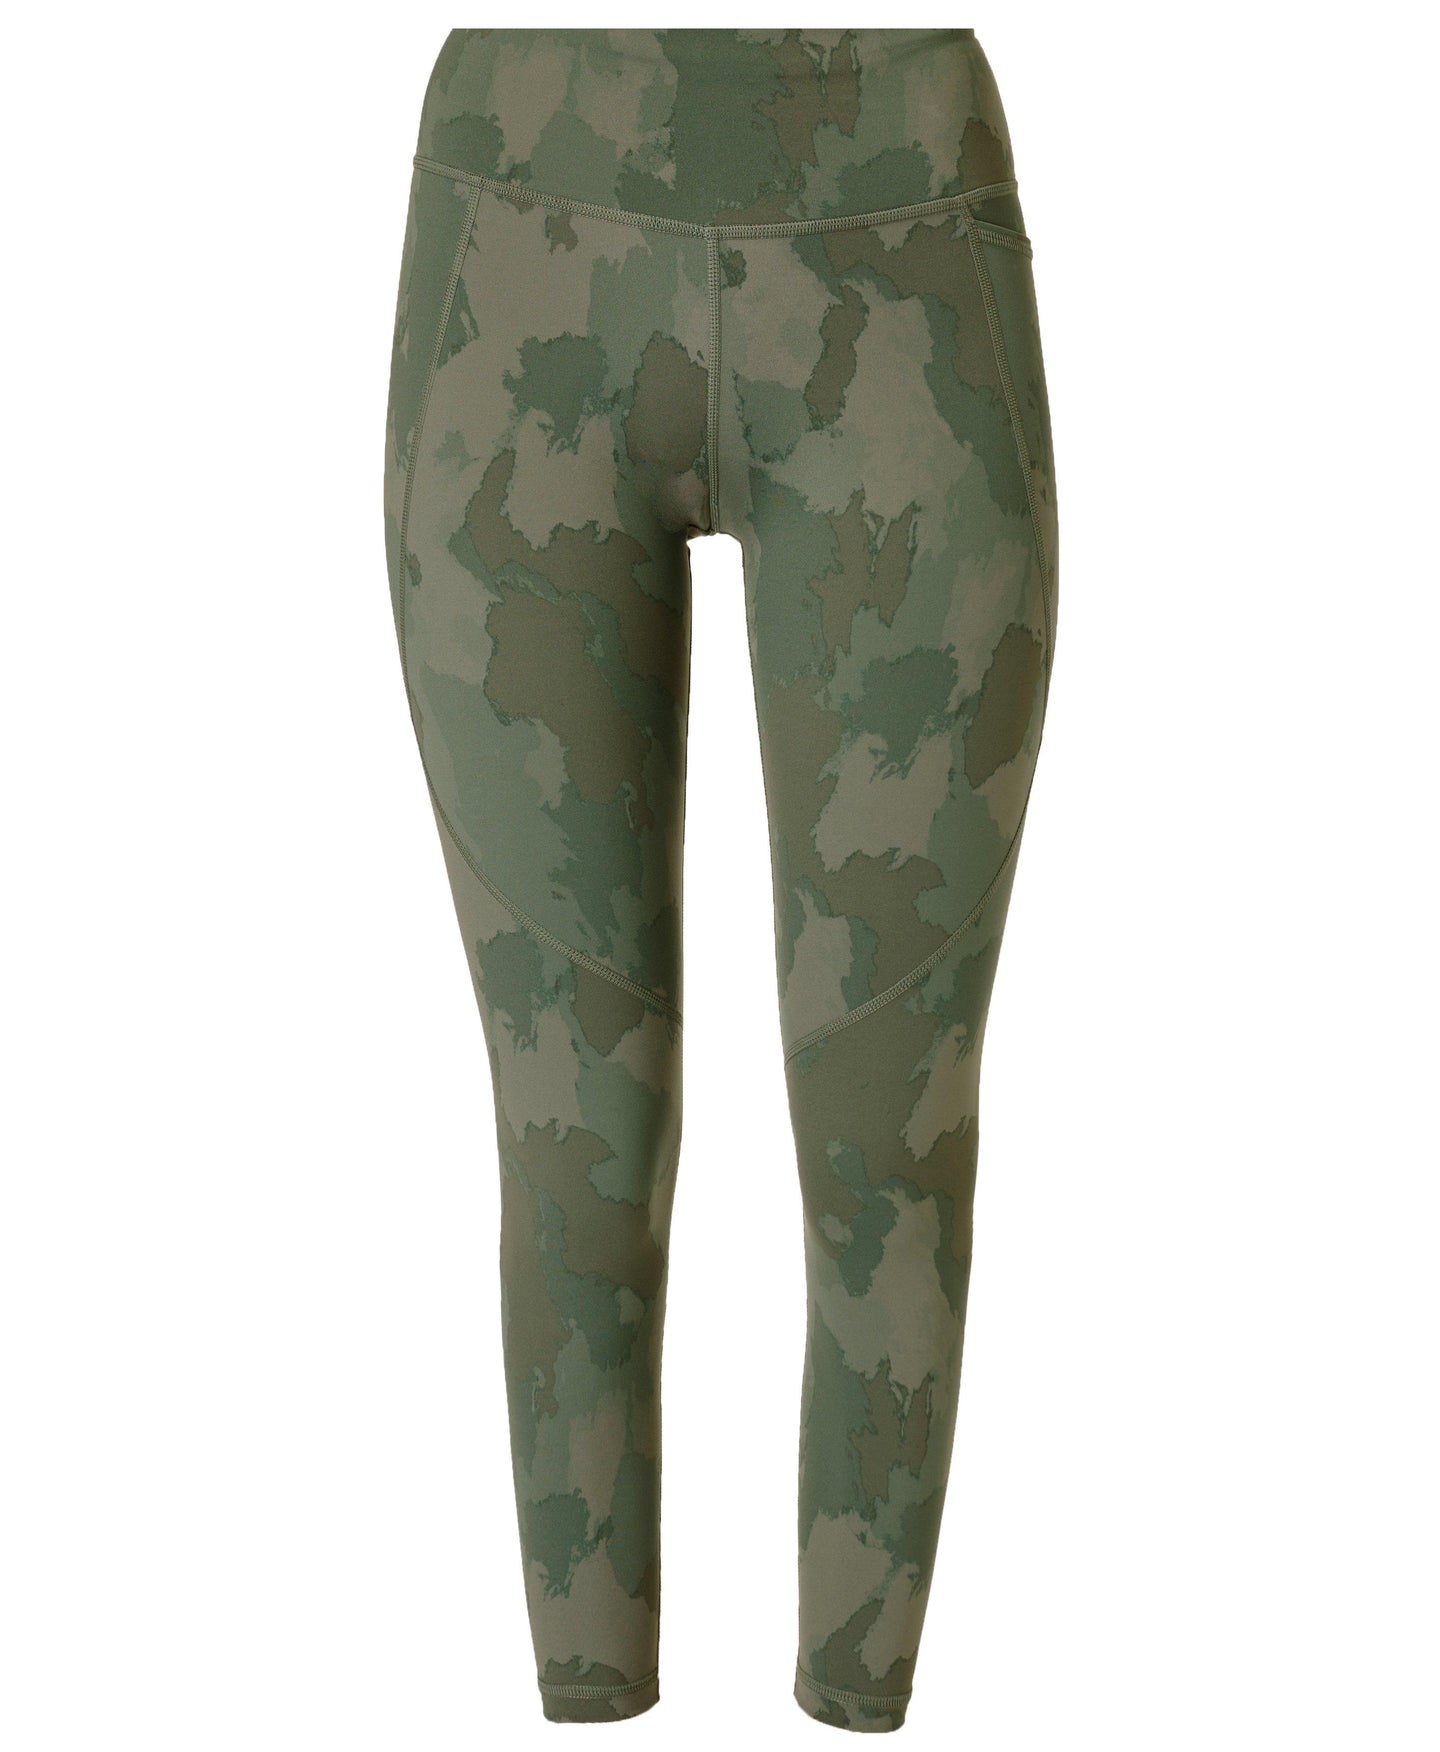 Power Workout Leggings Sb5400a Green-Painted-Camo-P